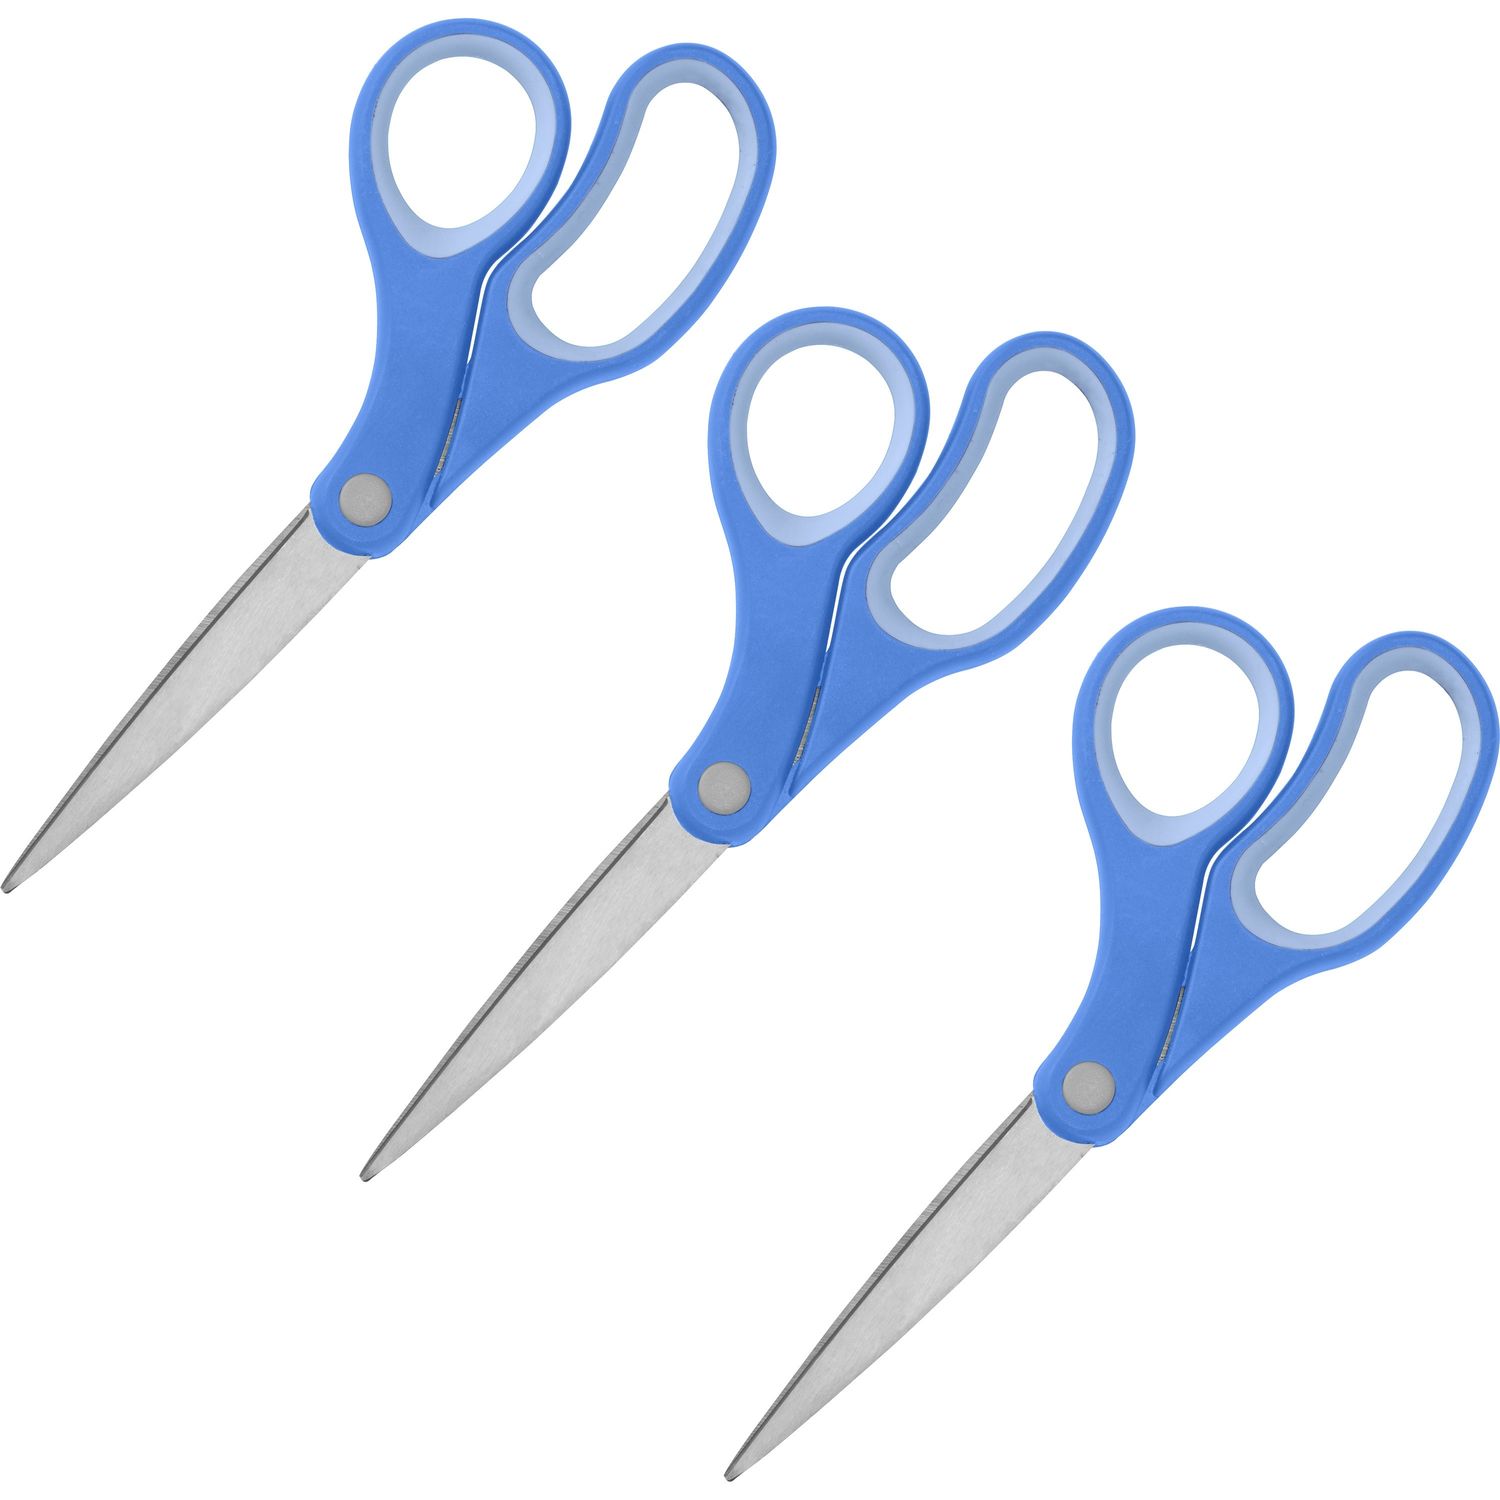 8" Bent Scissors 8" Overall Length, Stainless Steel, Blue, 3 / Bundle